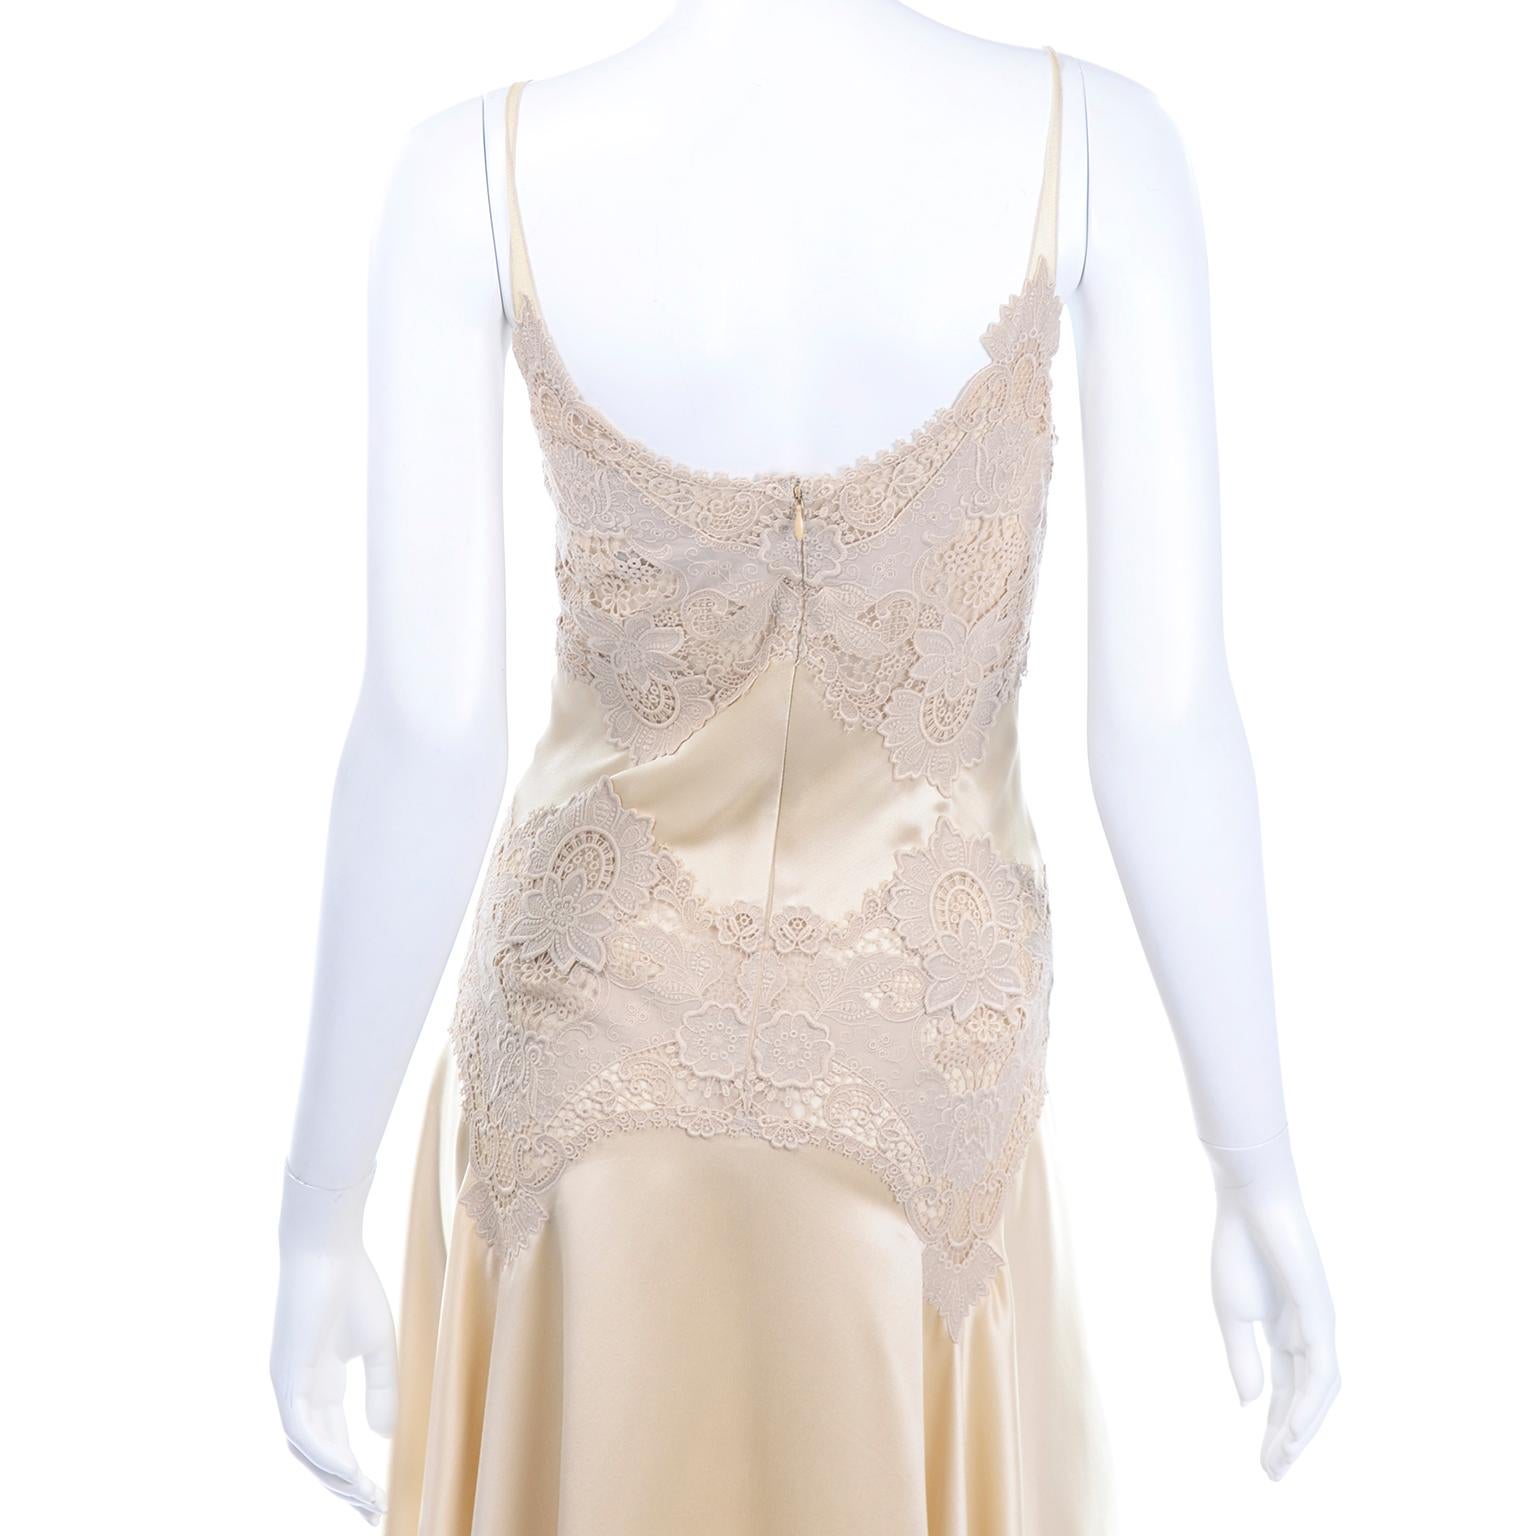 2005 Alexander McQueen Champagne Silk & Lace Slip Dress With Sleeveless Wrap Top 7